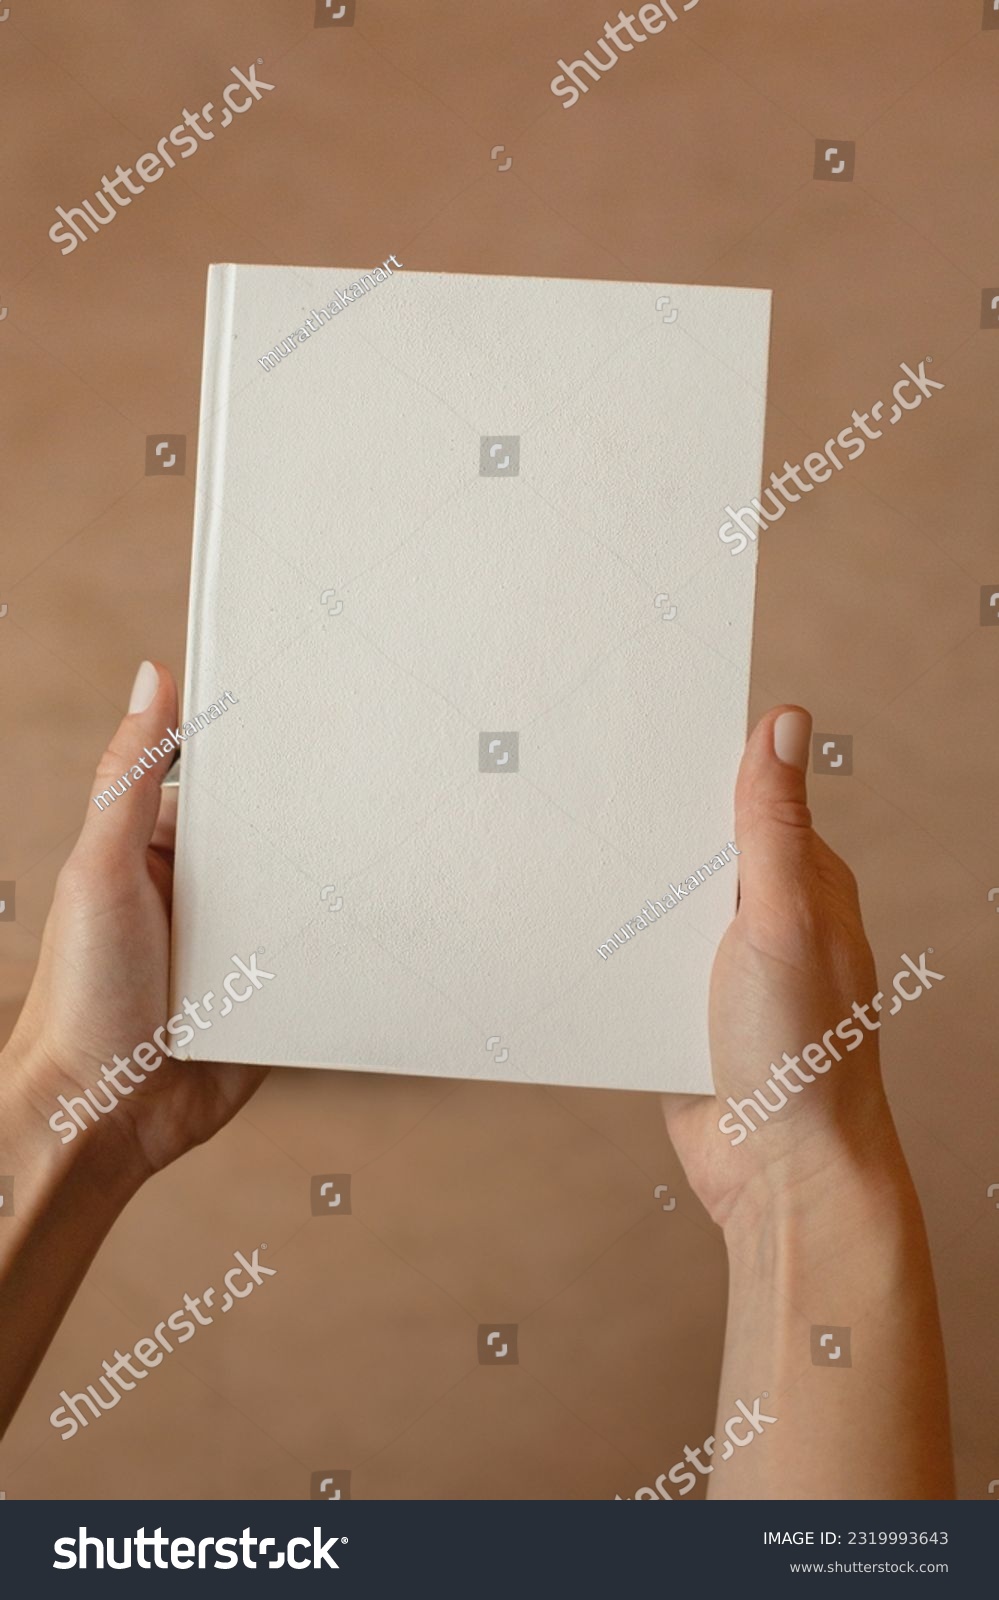 She is holding an empty notebook or book. Mockup book. Blank notebook, blank book #2319993643